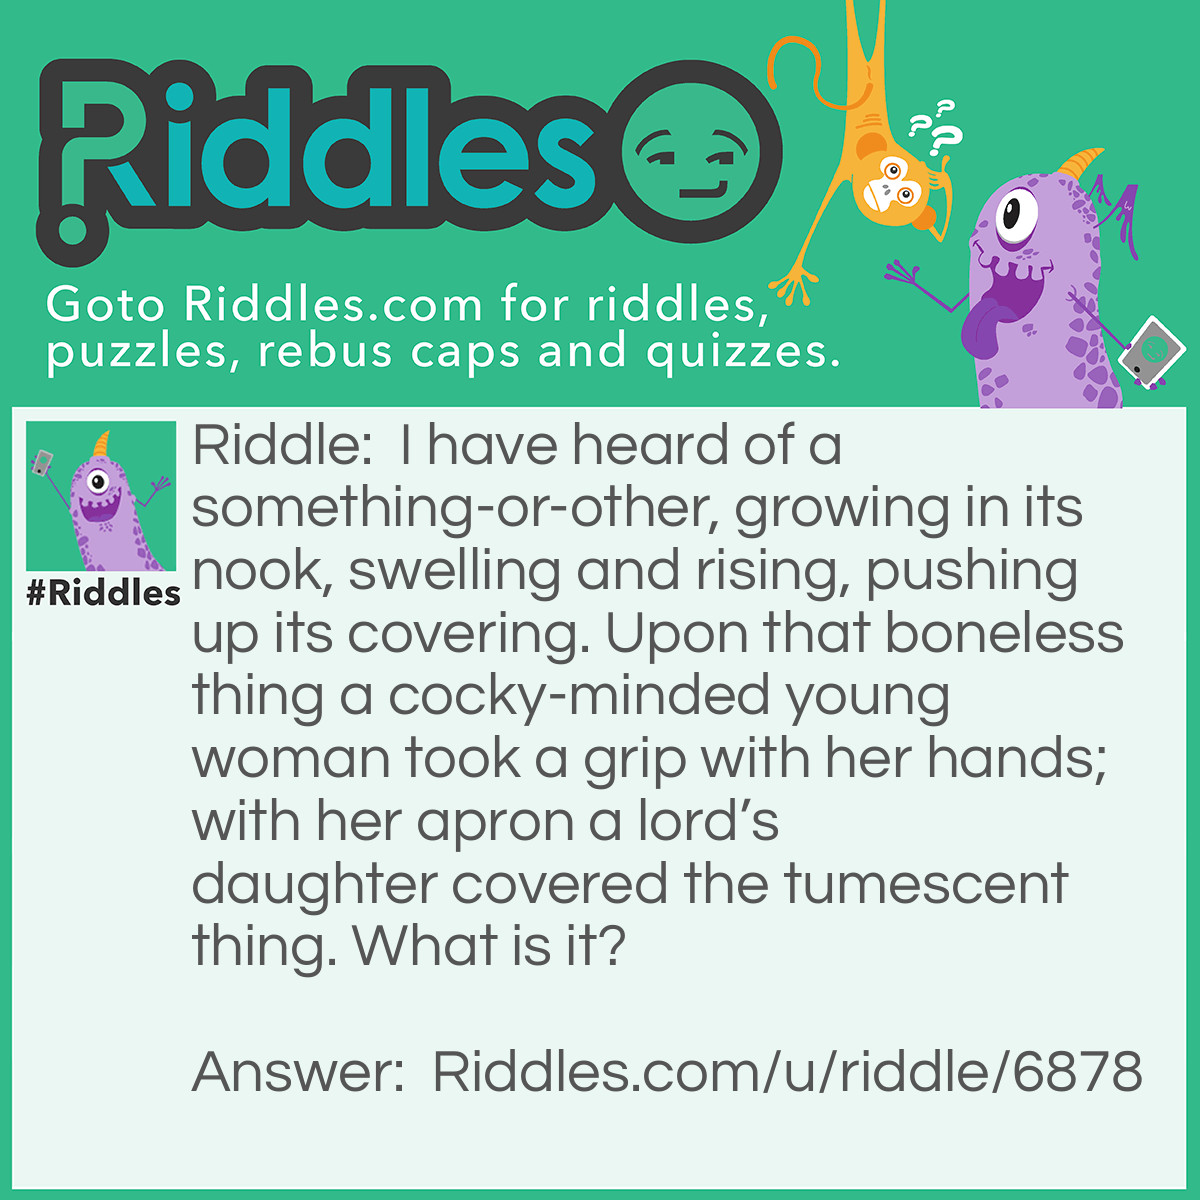 Riddle: I have heard of a something-or-other, growing in its nook, swelling and rising, pushing up its covering. Upon that boneless thing a cocky-minded young woman took a grip with her hands; with her apron a lord's daughter covered the tumescent thing. What is it? Answer: Dough turning into bread.